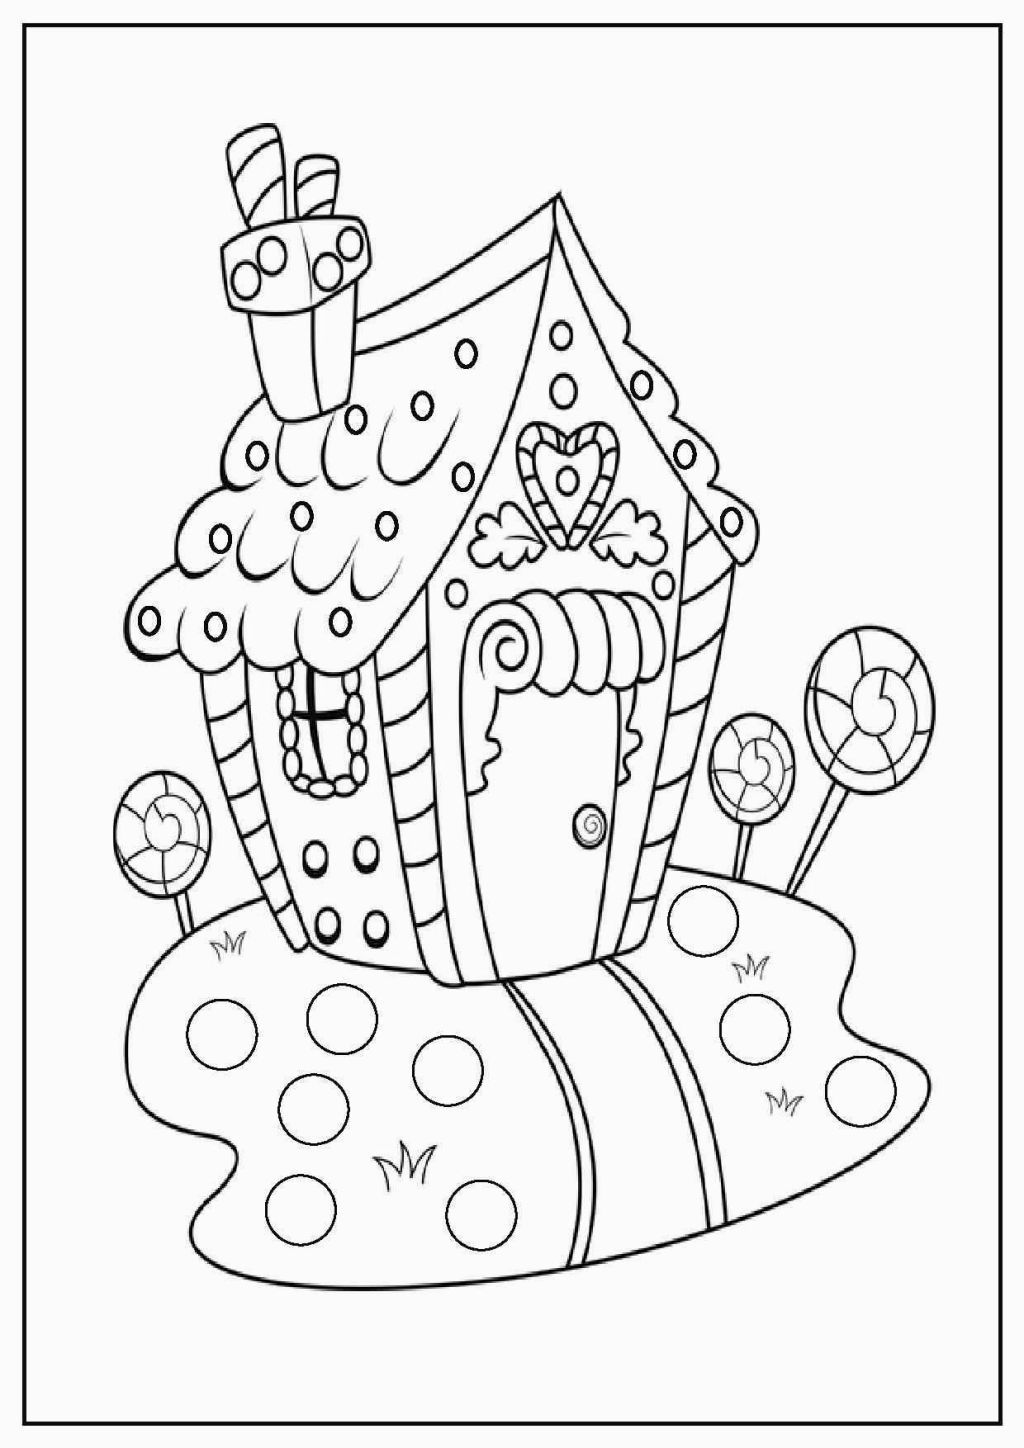 twas the night before christmas coloring book | Coloring Pages